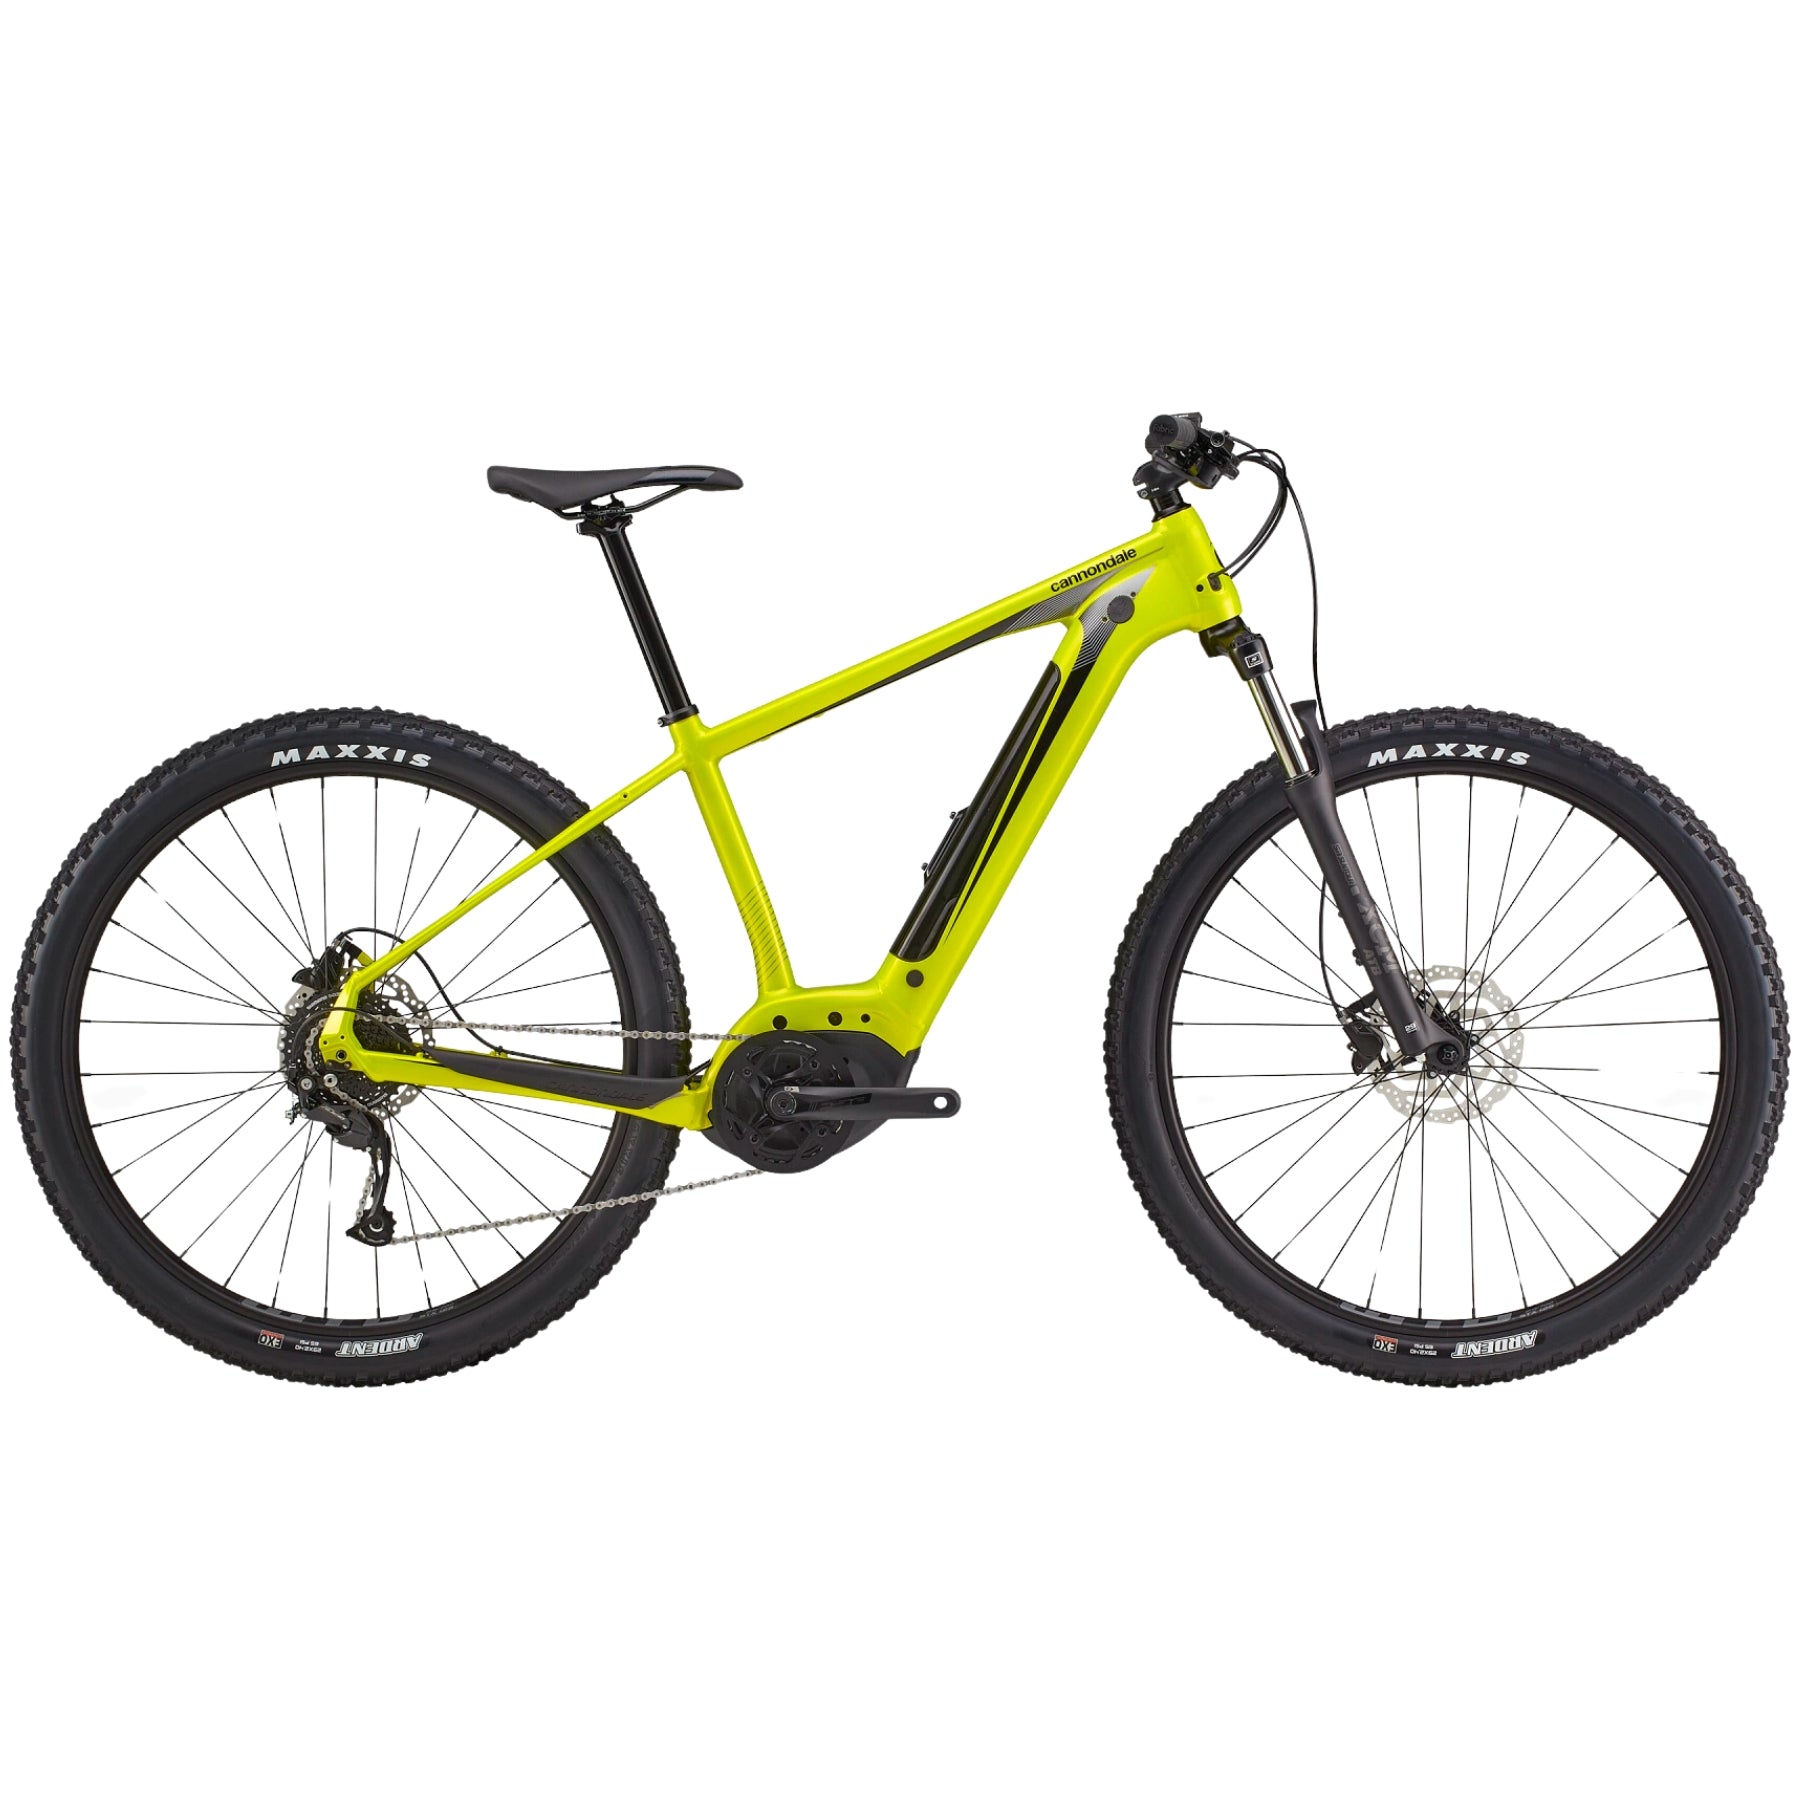 Cannondale Trail Neo 4 Highlighter